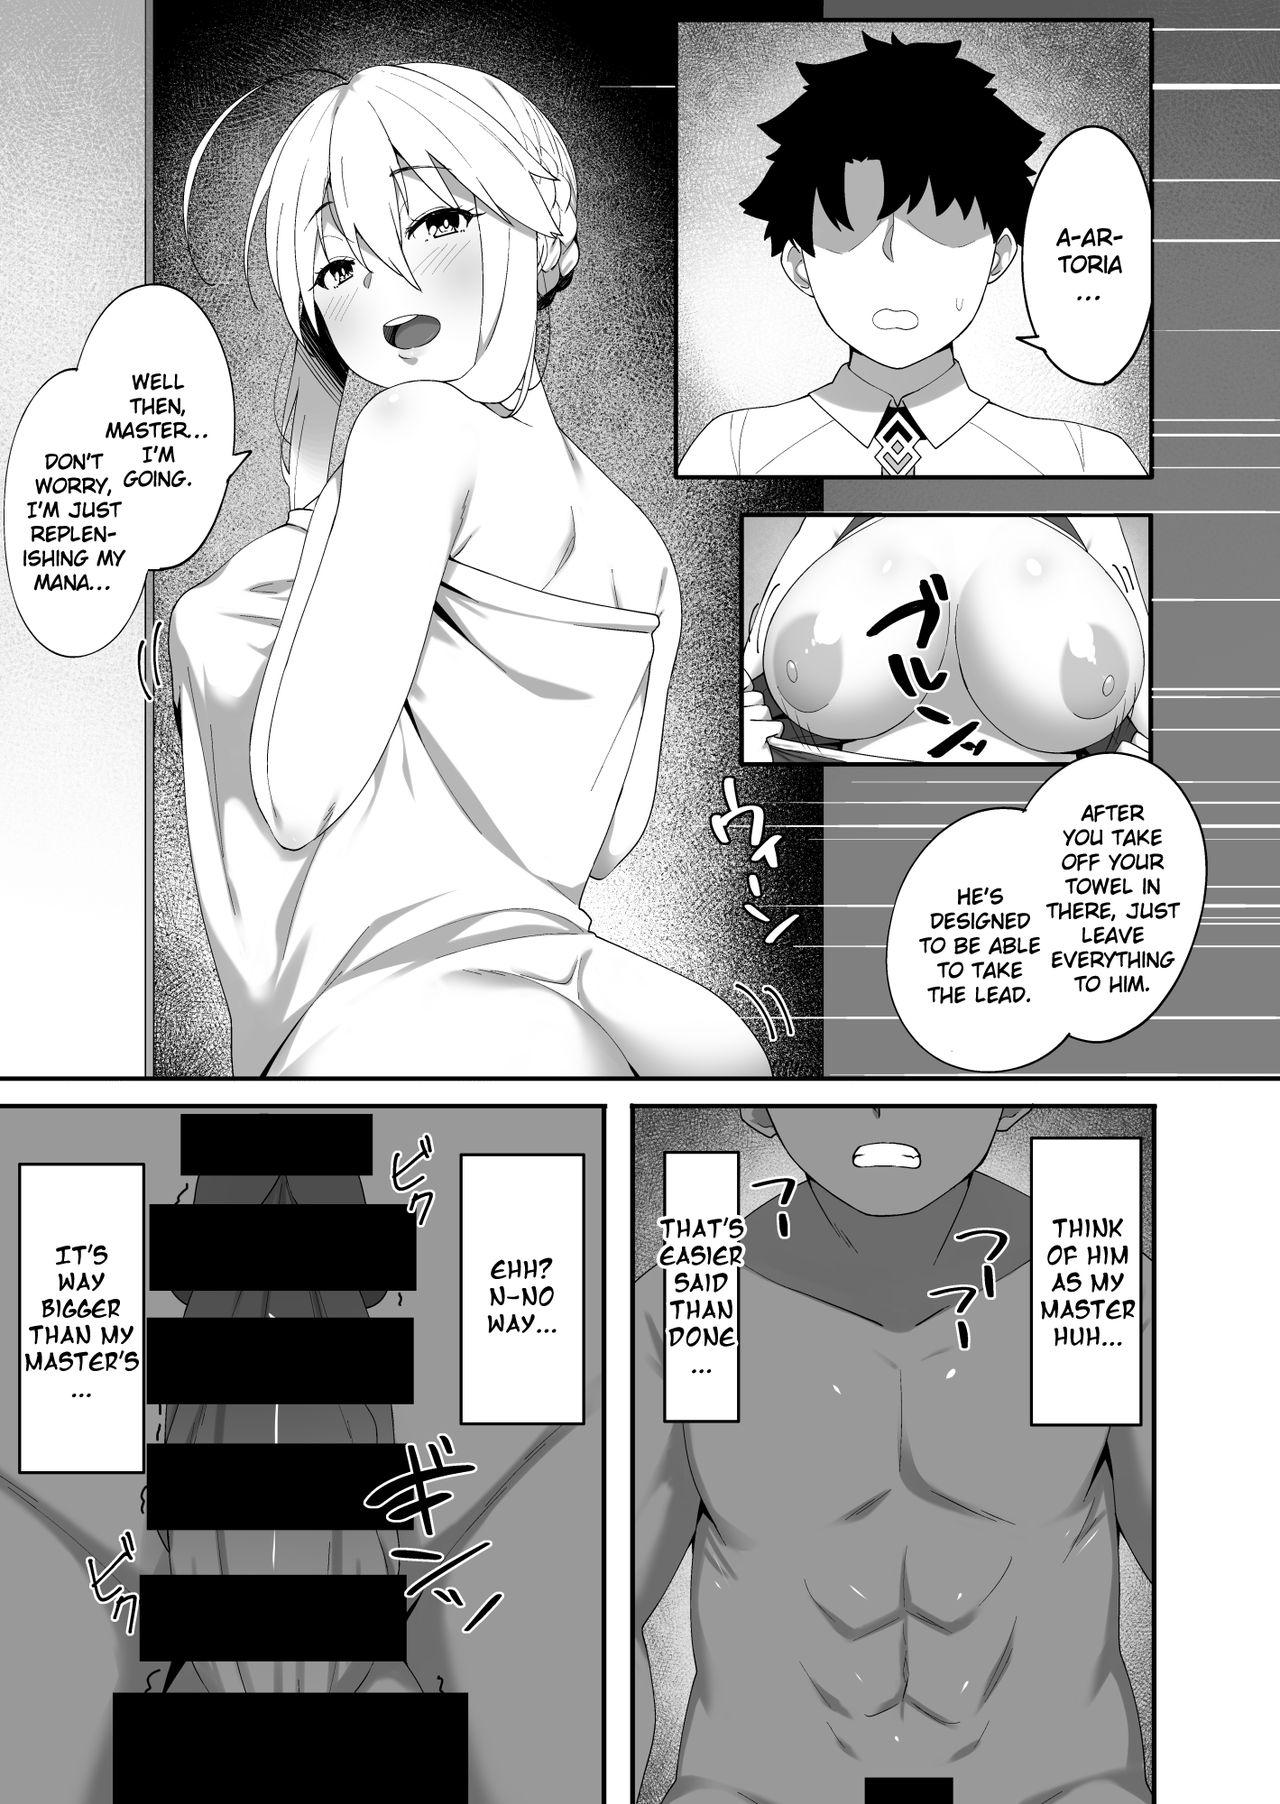 The Kabe no Mukou de Kimi ga Naku 2 | Crying Out From The Other Side Of The Wall 2 - Fate grand order Novinhas - Page 4